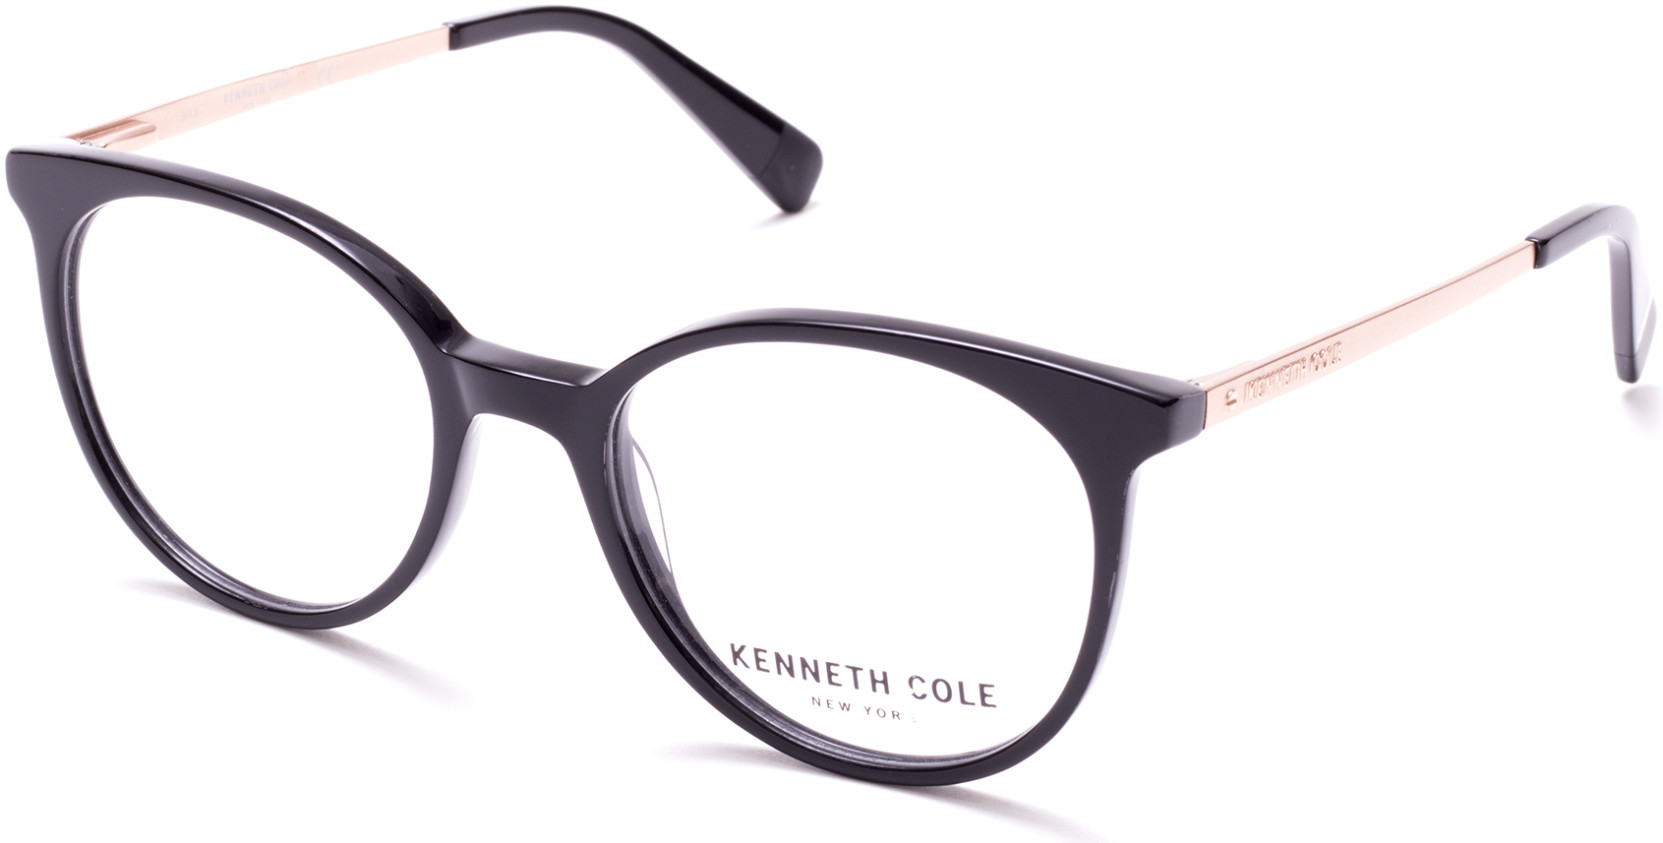 KENNETH COLE NY 0288